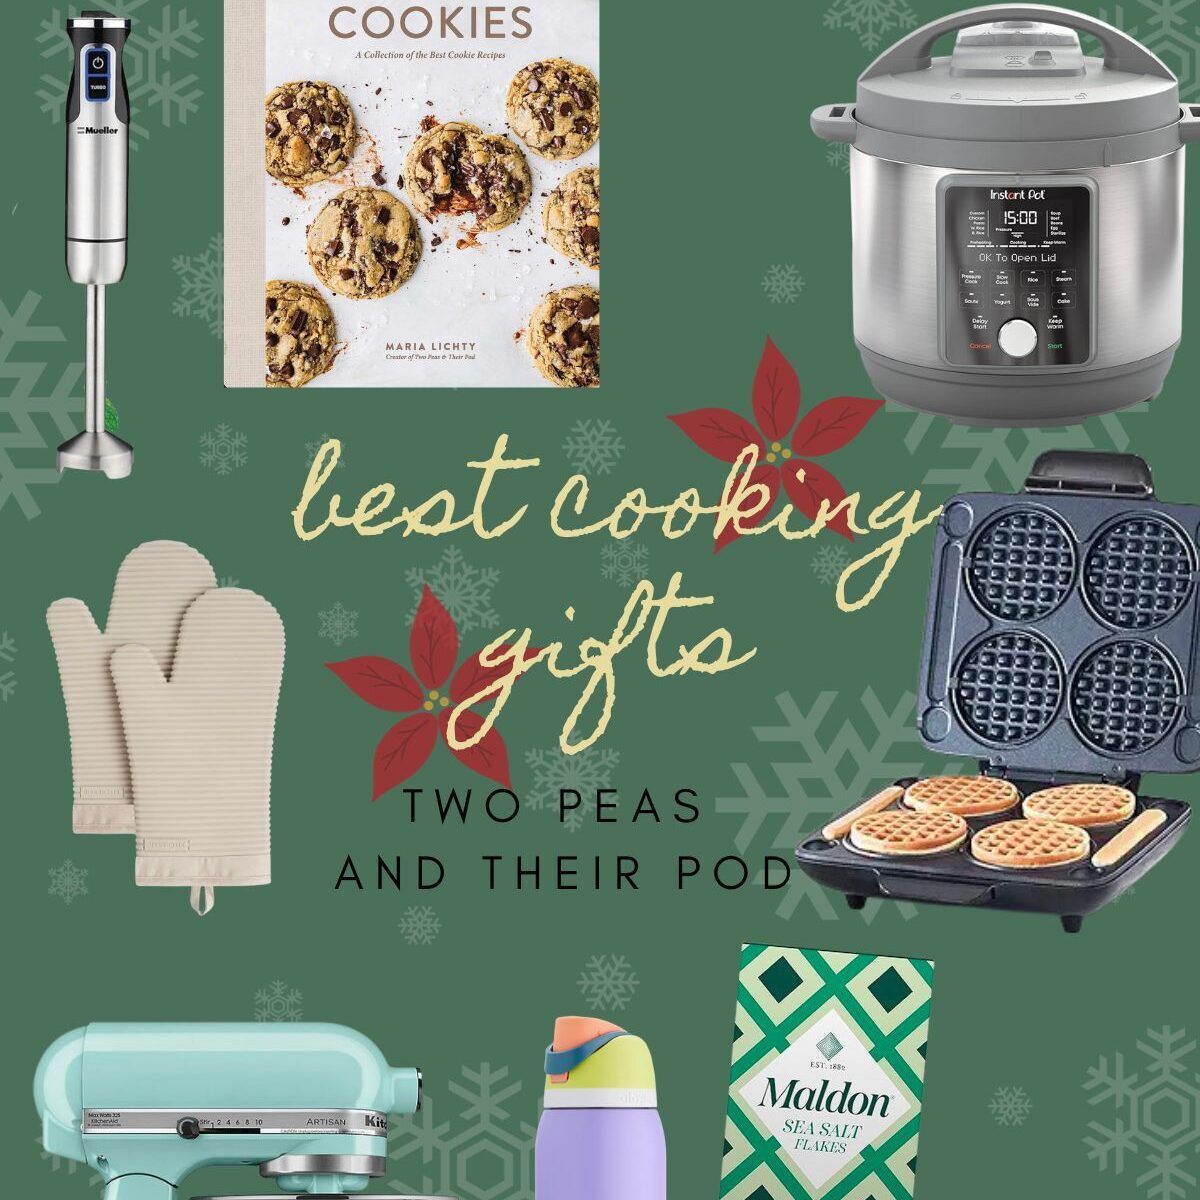 Gift Ideas for Home Cooks & Foodies at any Budget - From My Bowl